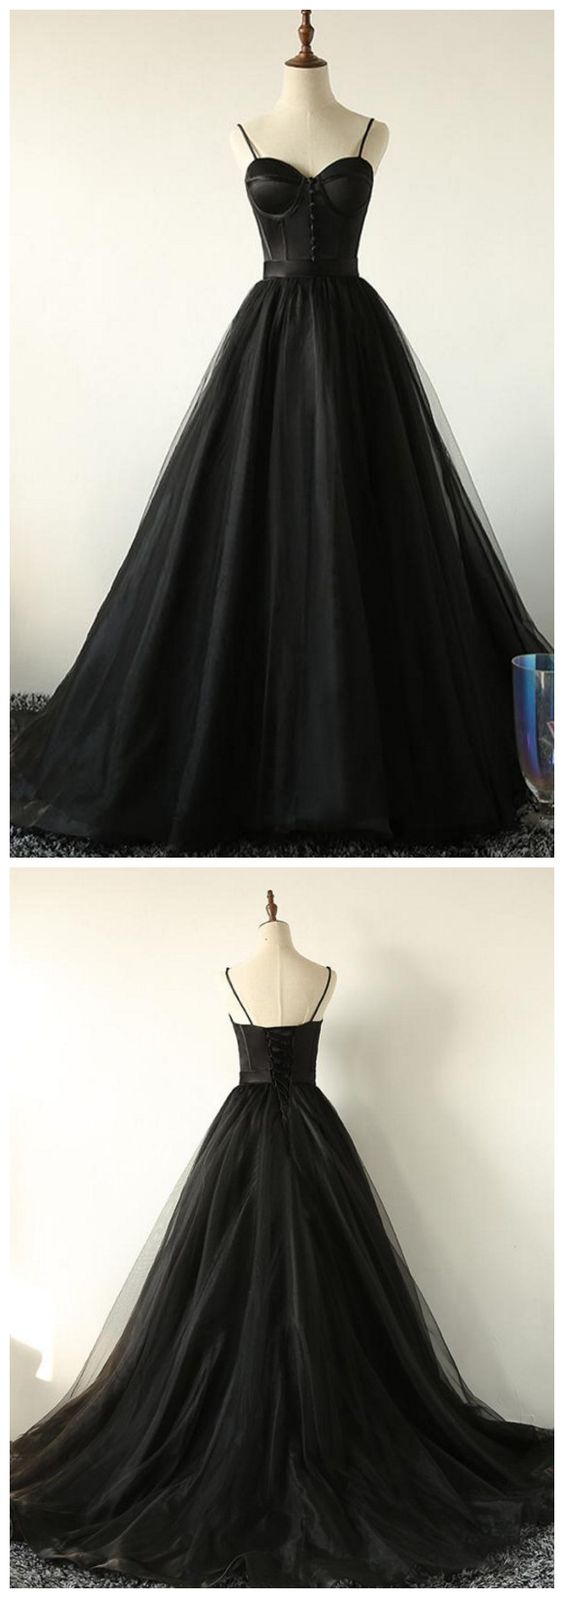 Ball Gown Spaghetti Straps Black Tulle Prom Dress M8640